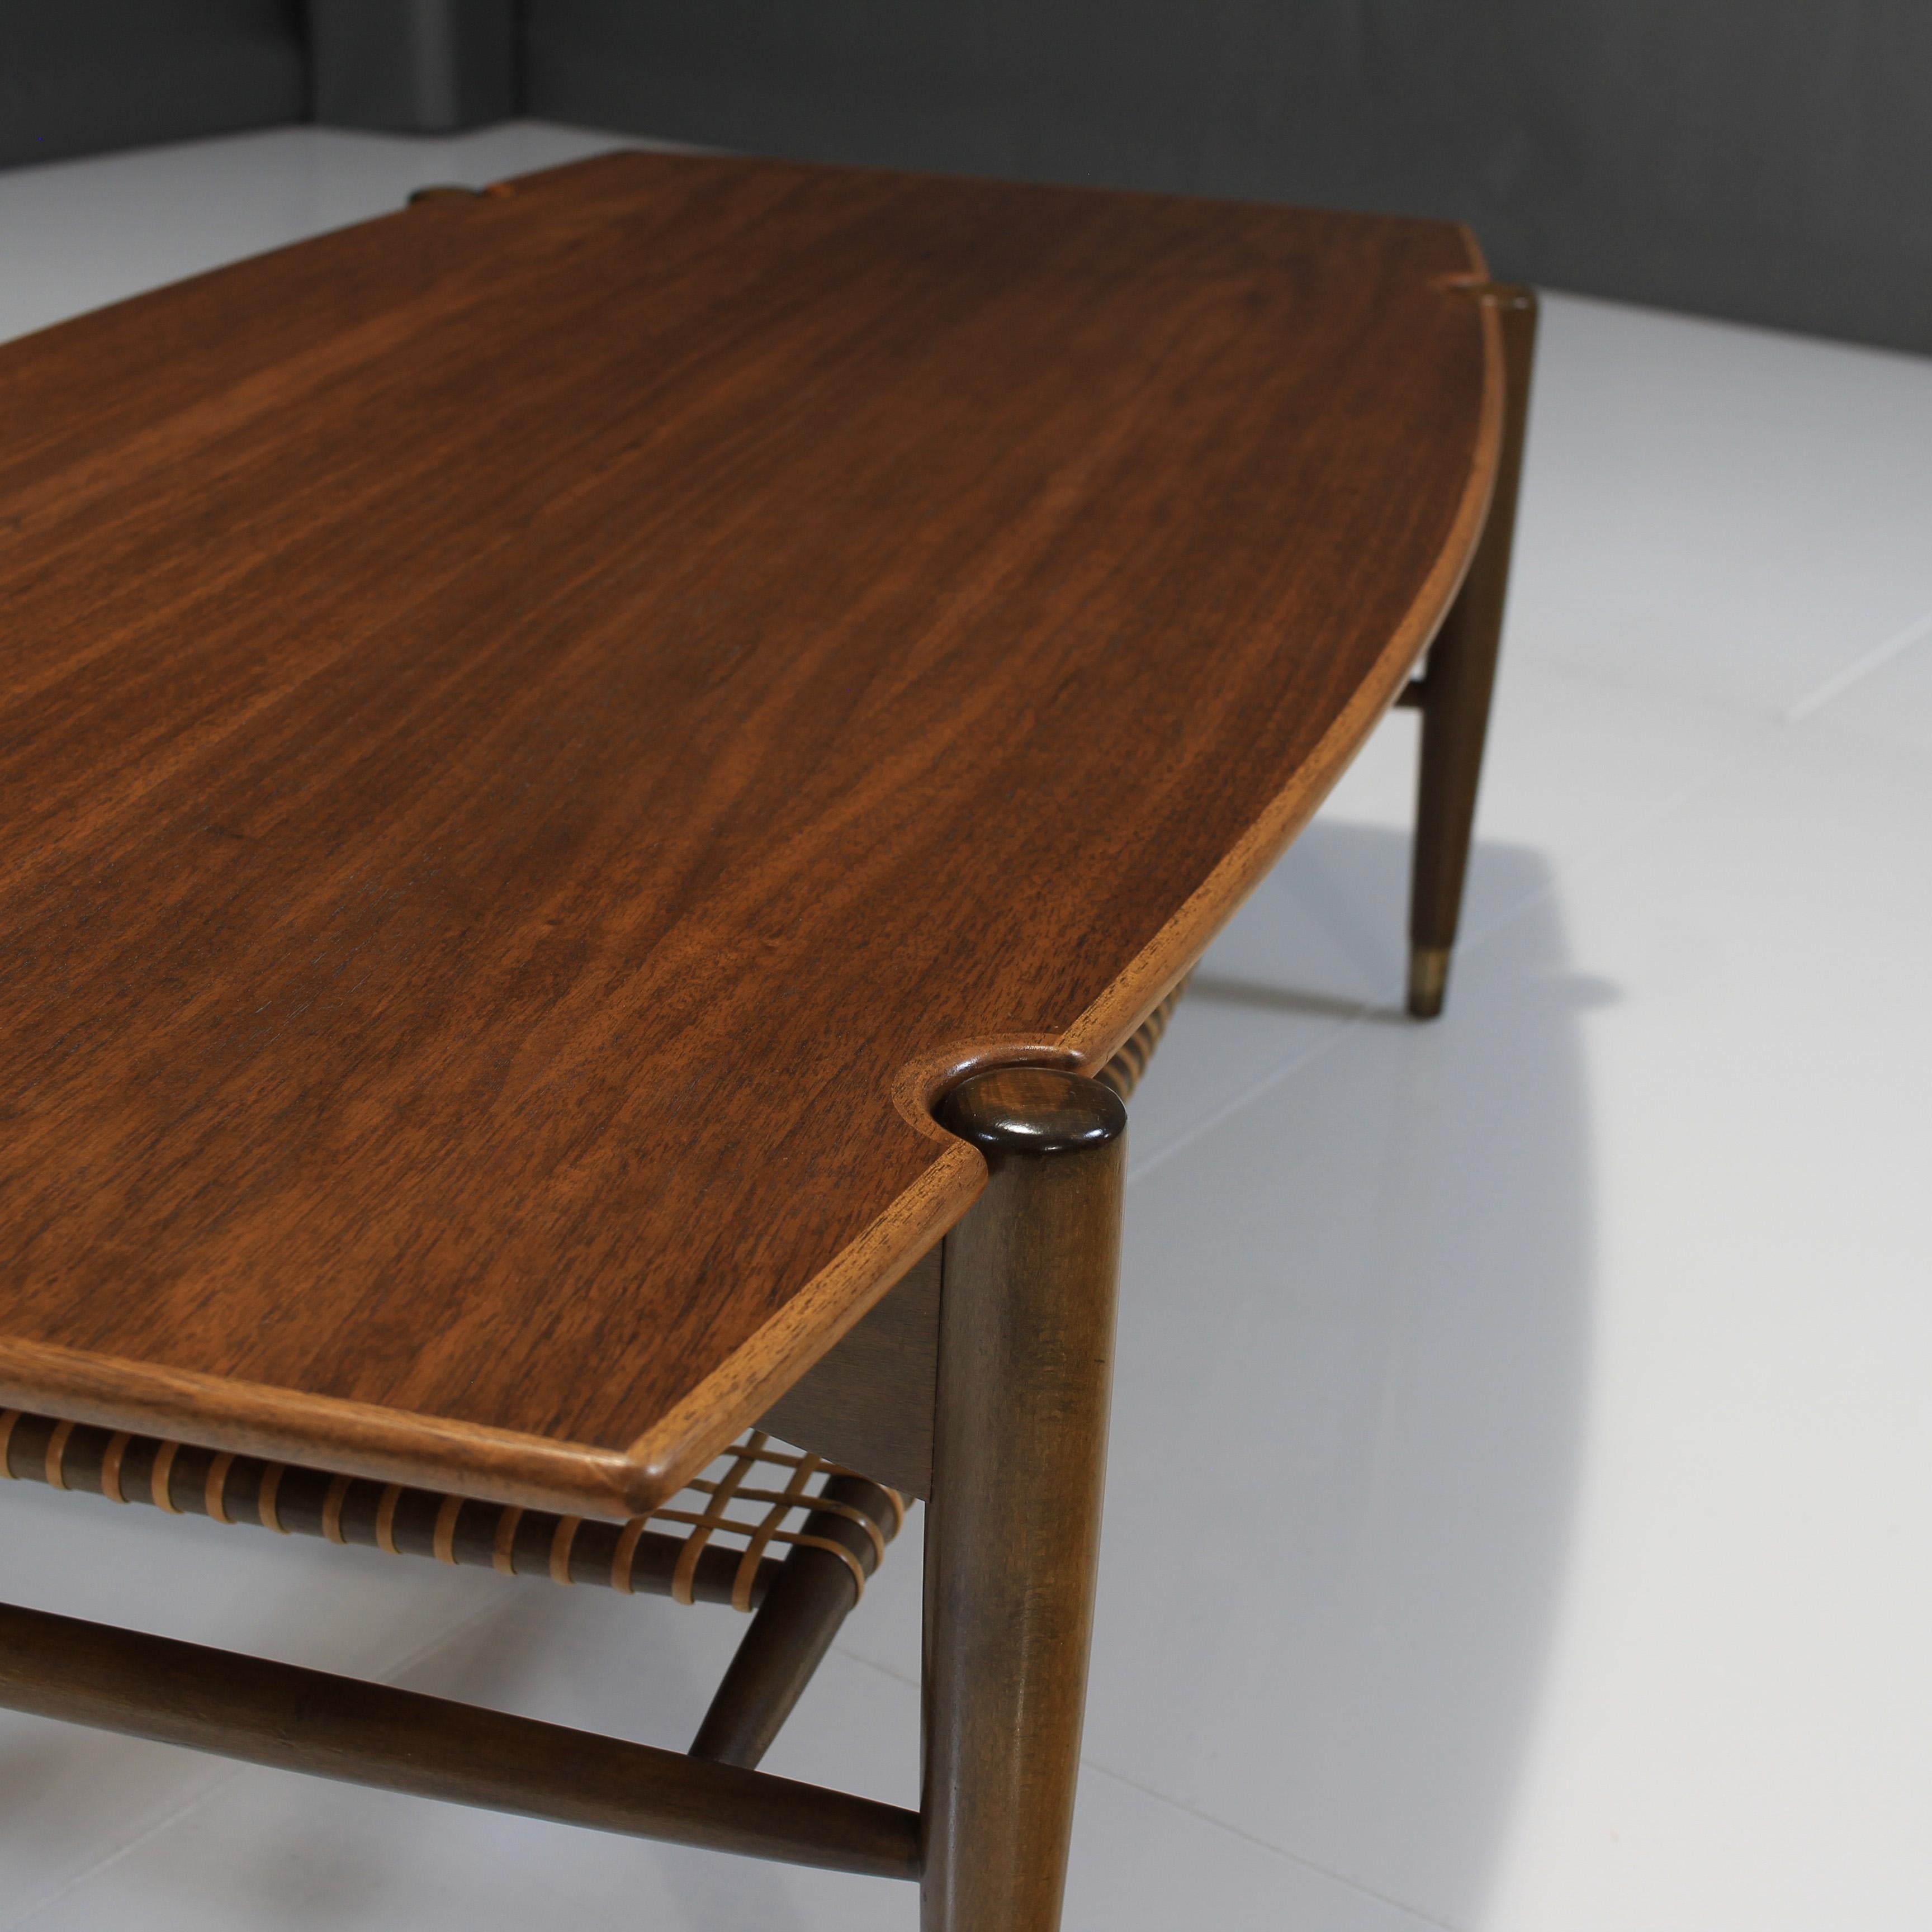 Mid-20th Century Teak and Cane Coffee Table by Folke Ohlsson 1